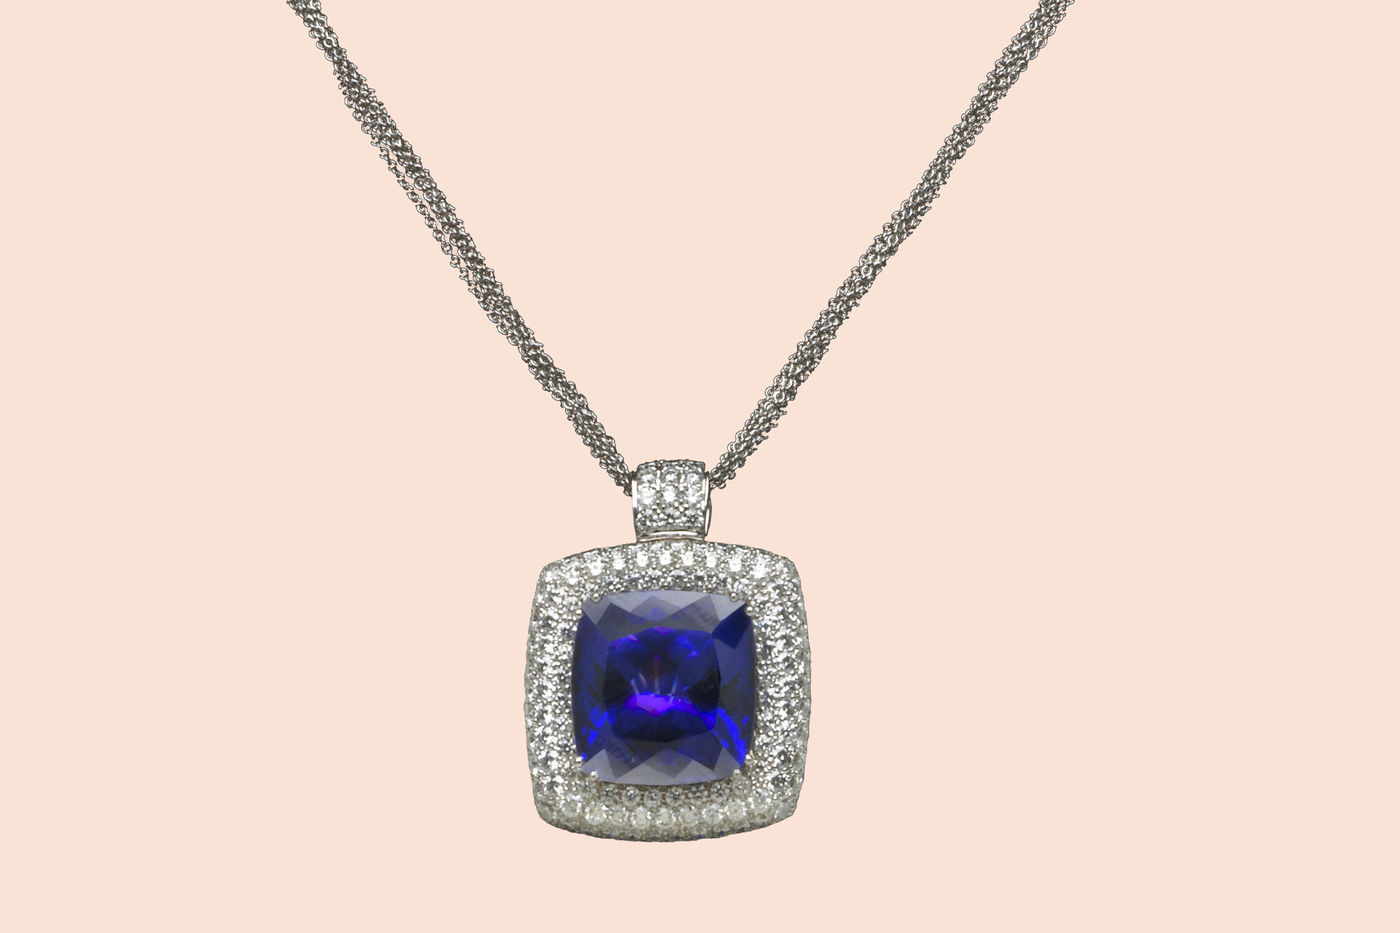 White gold necklace, featuring a large, blue gem—tanzanite. The gem is surrounded by rows of small diamonds. 